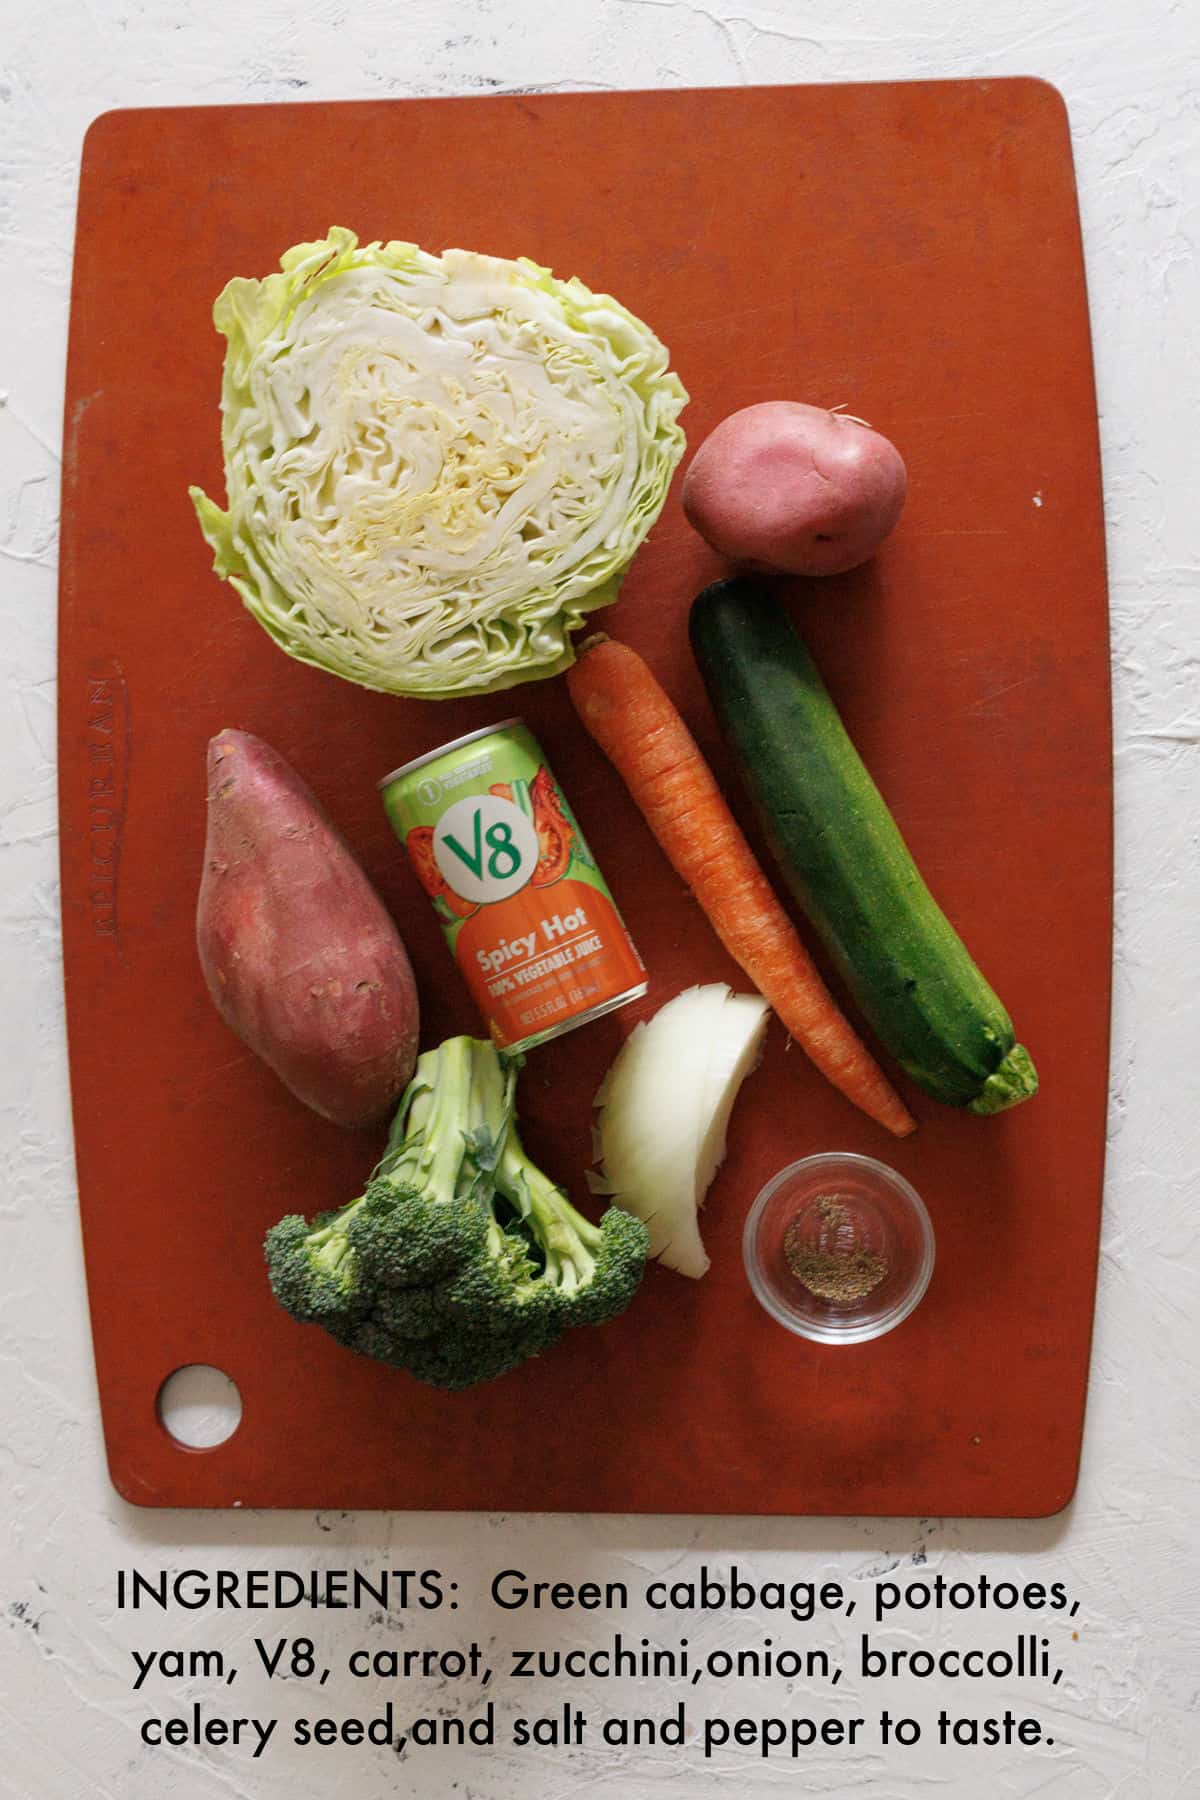 Cabbage, potatoes, yam, V8 juice, carrot, zucchini, broccoli and celery seed on cutting board.